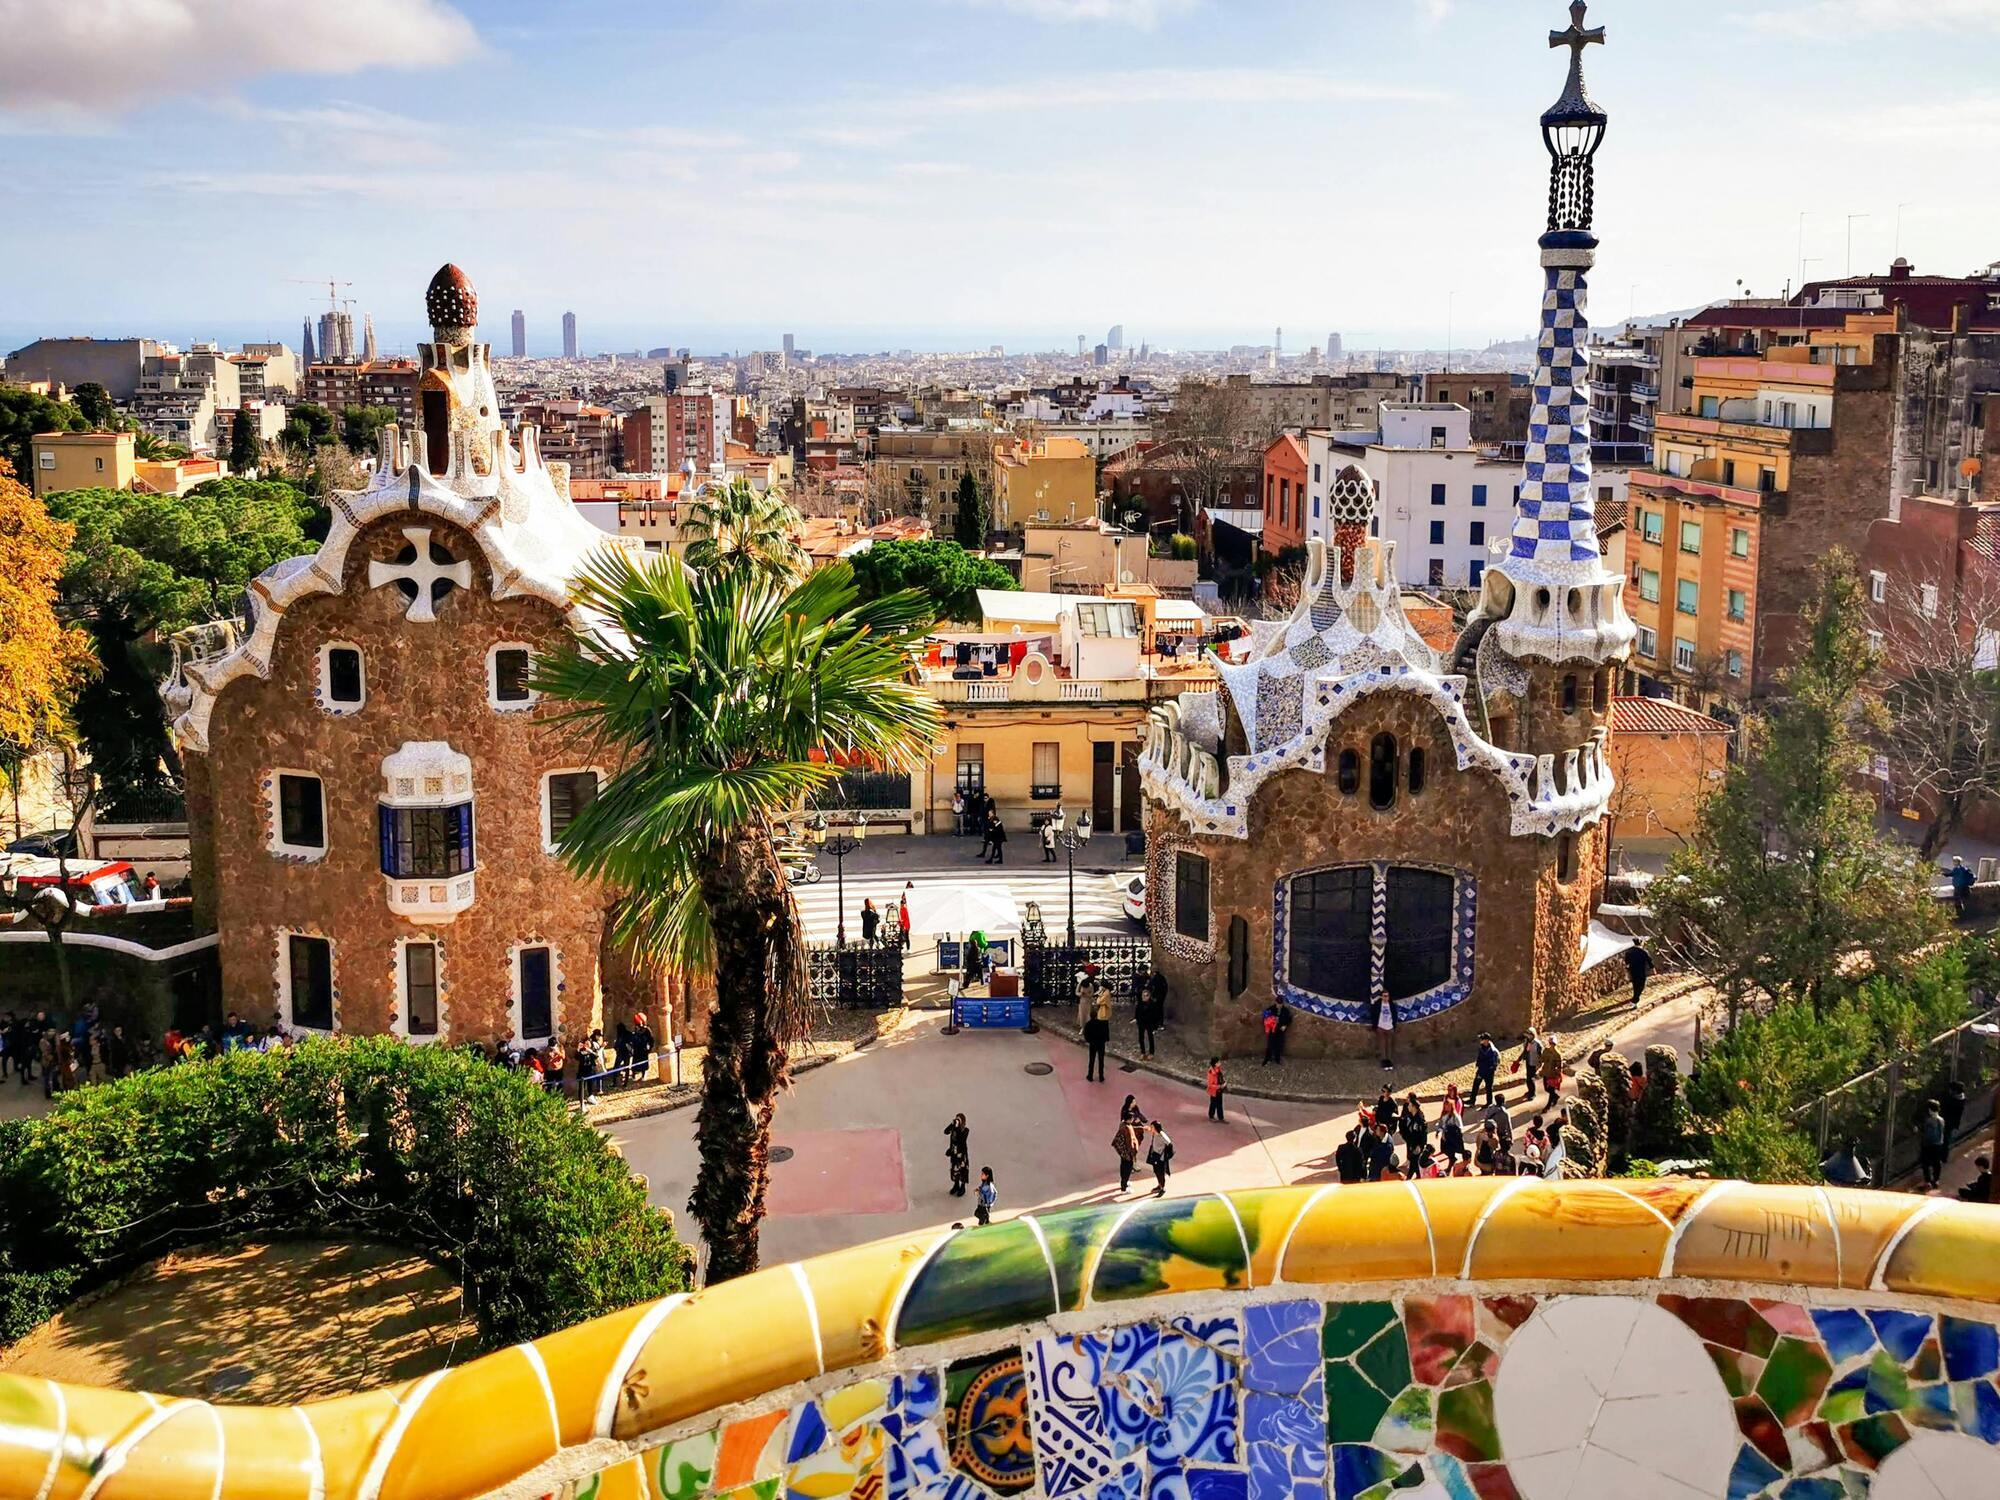 Where to stay in Barcelona so you don't miss out on the most important things. A guide to neighborhoods and places of interest